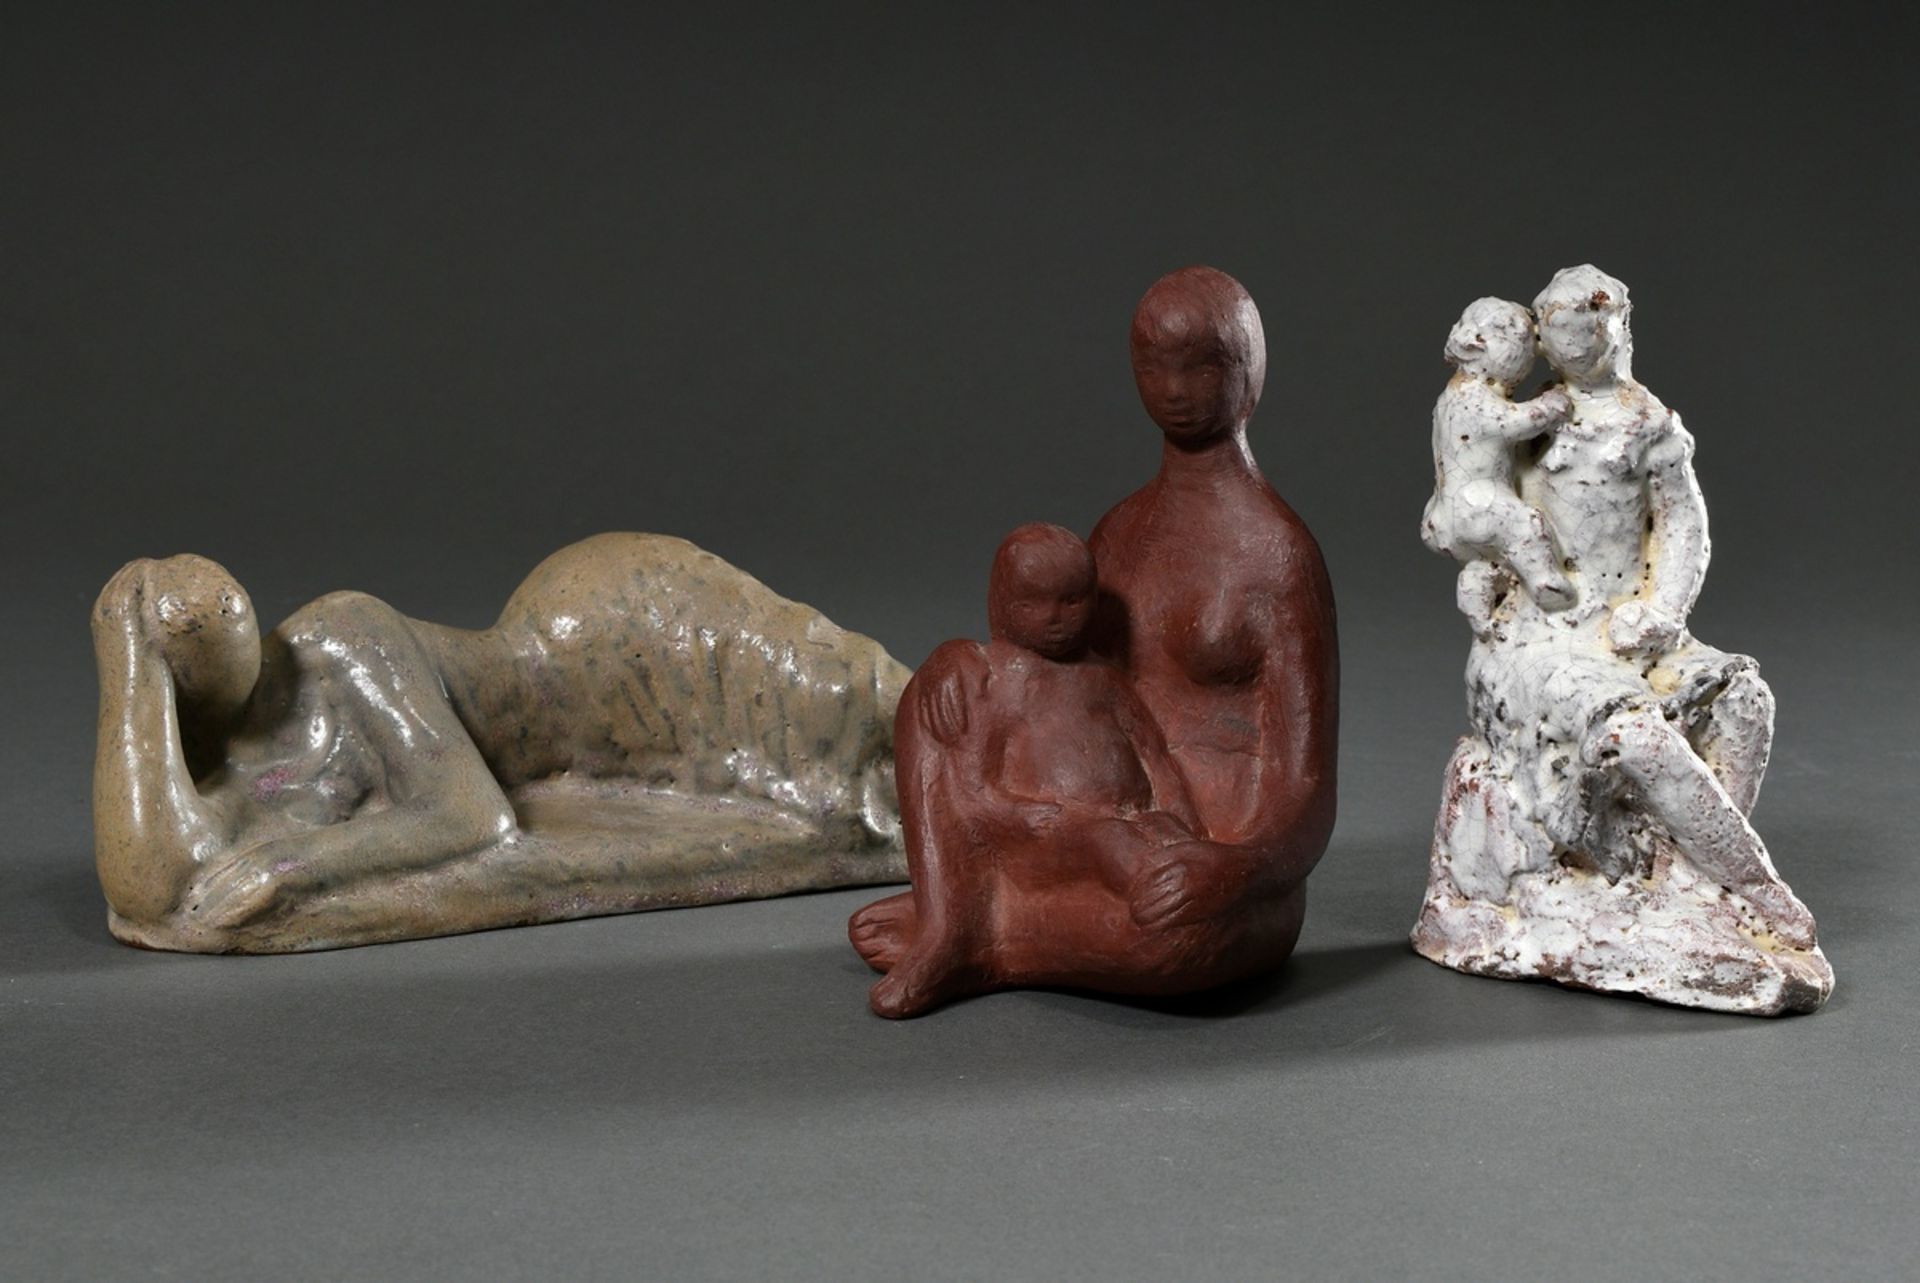 3 Various Maetzel, Monika (1917-2010) figures "Mother with child in lap", "Lying woman" and "Sittin